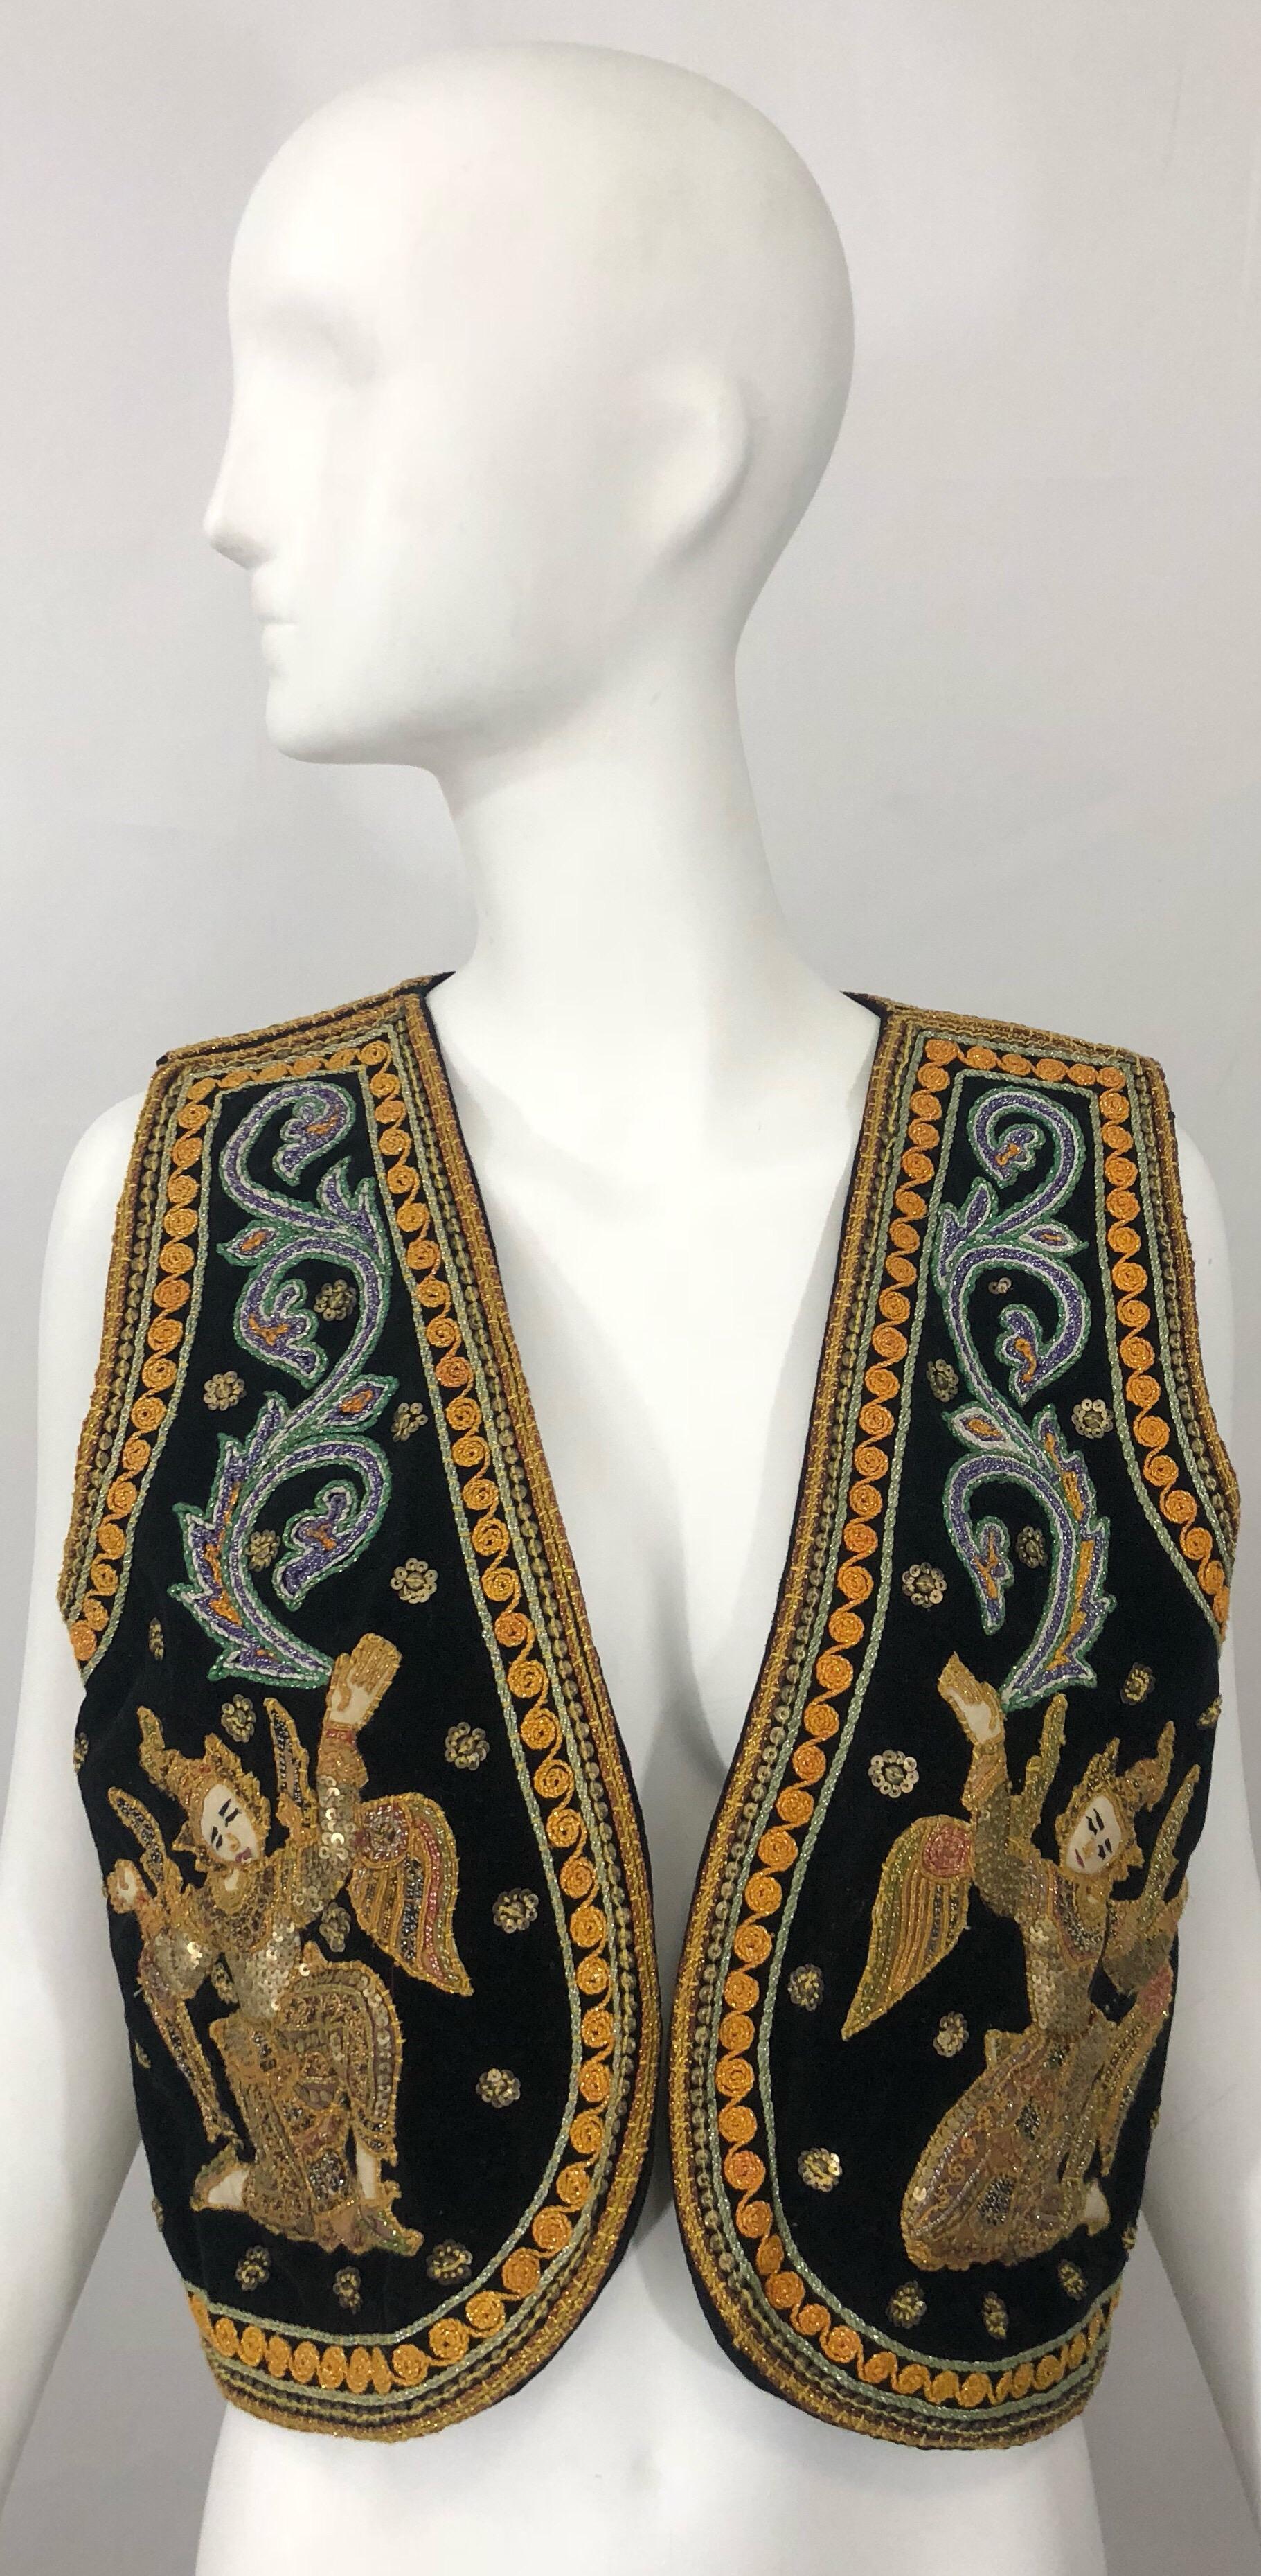 Amazing 1970s Egyptian inspired 3-D embroidered black velvet boho sequined crop vest!  Features intricate embroidery on the front and back. Vibrant colors of yellow, blue, red, red and gold throughout. Hundreds of small hand-sewn sequins throughout